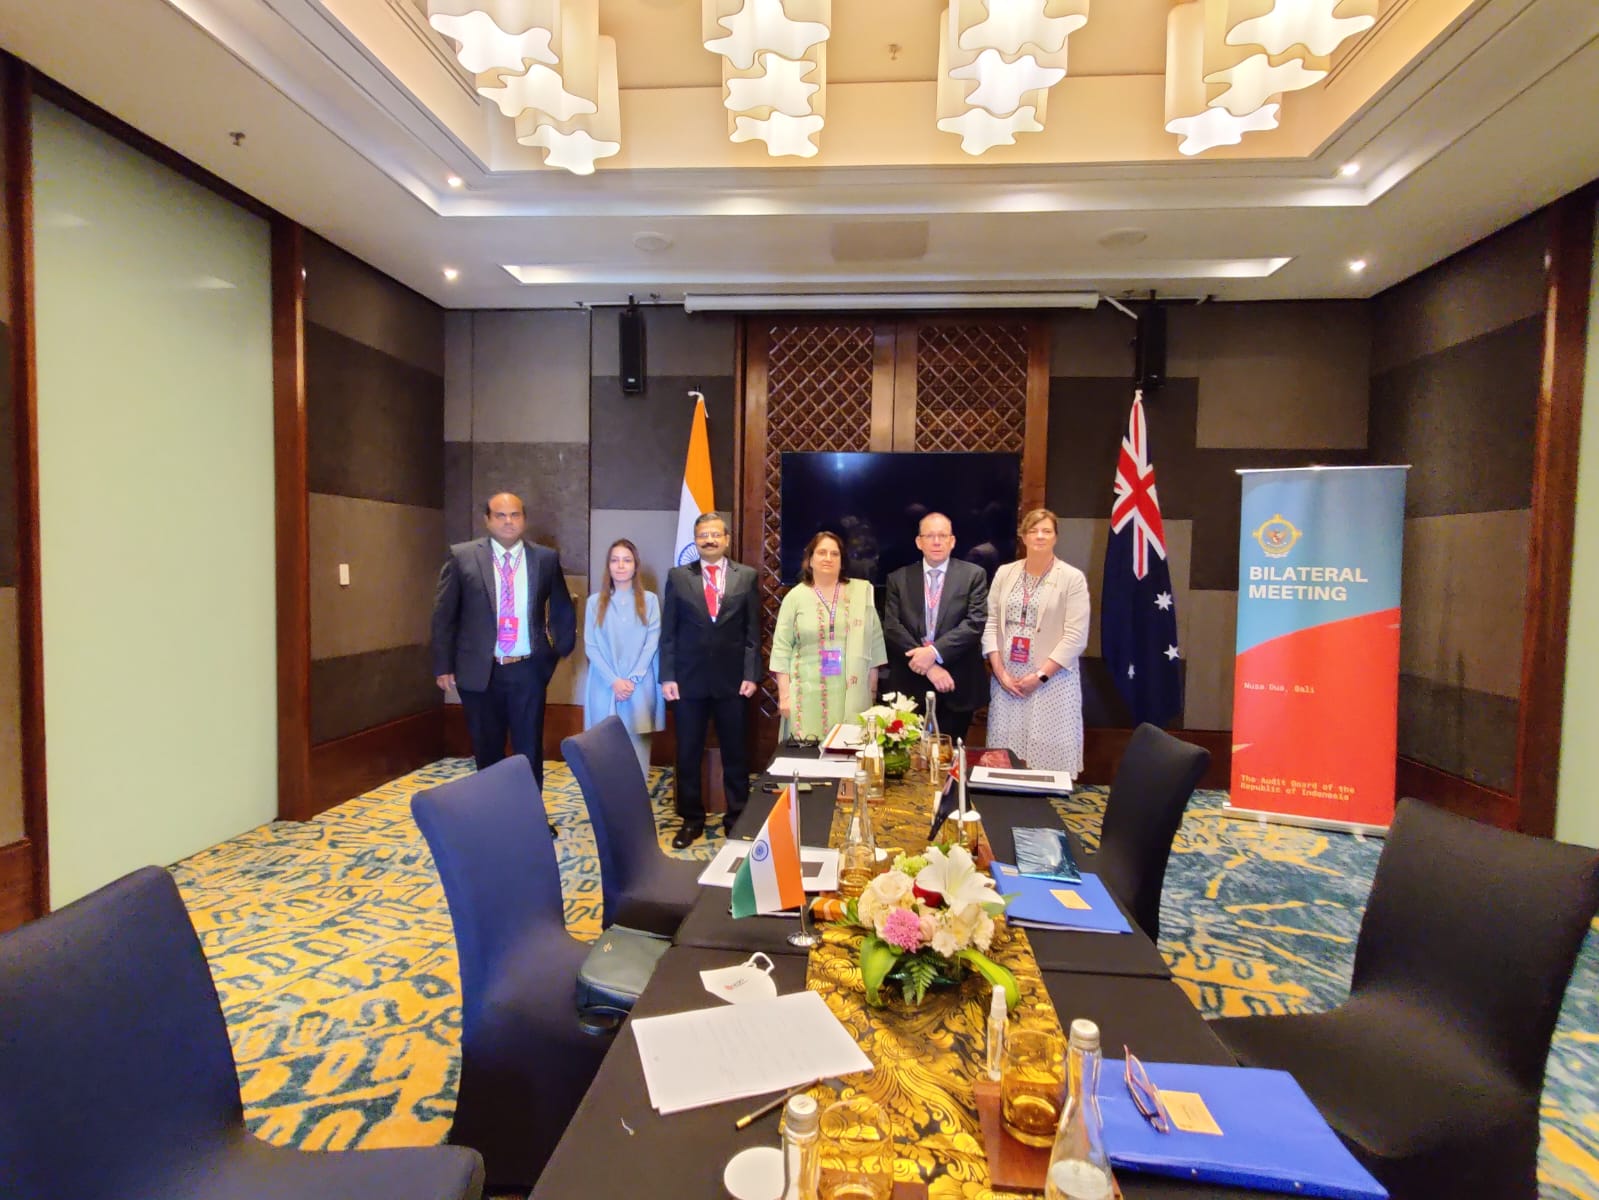 Bilateral meeting held between Ms. Parveen Mehta, DAI(HR, IR & Coordination) and Mr Grant Hehir, Auditor-General for Australia on 30th August, 2022 on the side-lines of the SAI20 Summit held on 29-30th August, 2022 in Bali, Indonesia